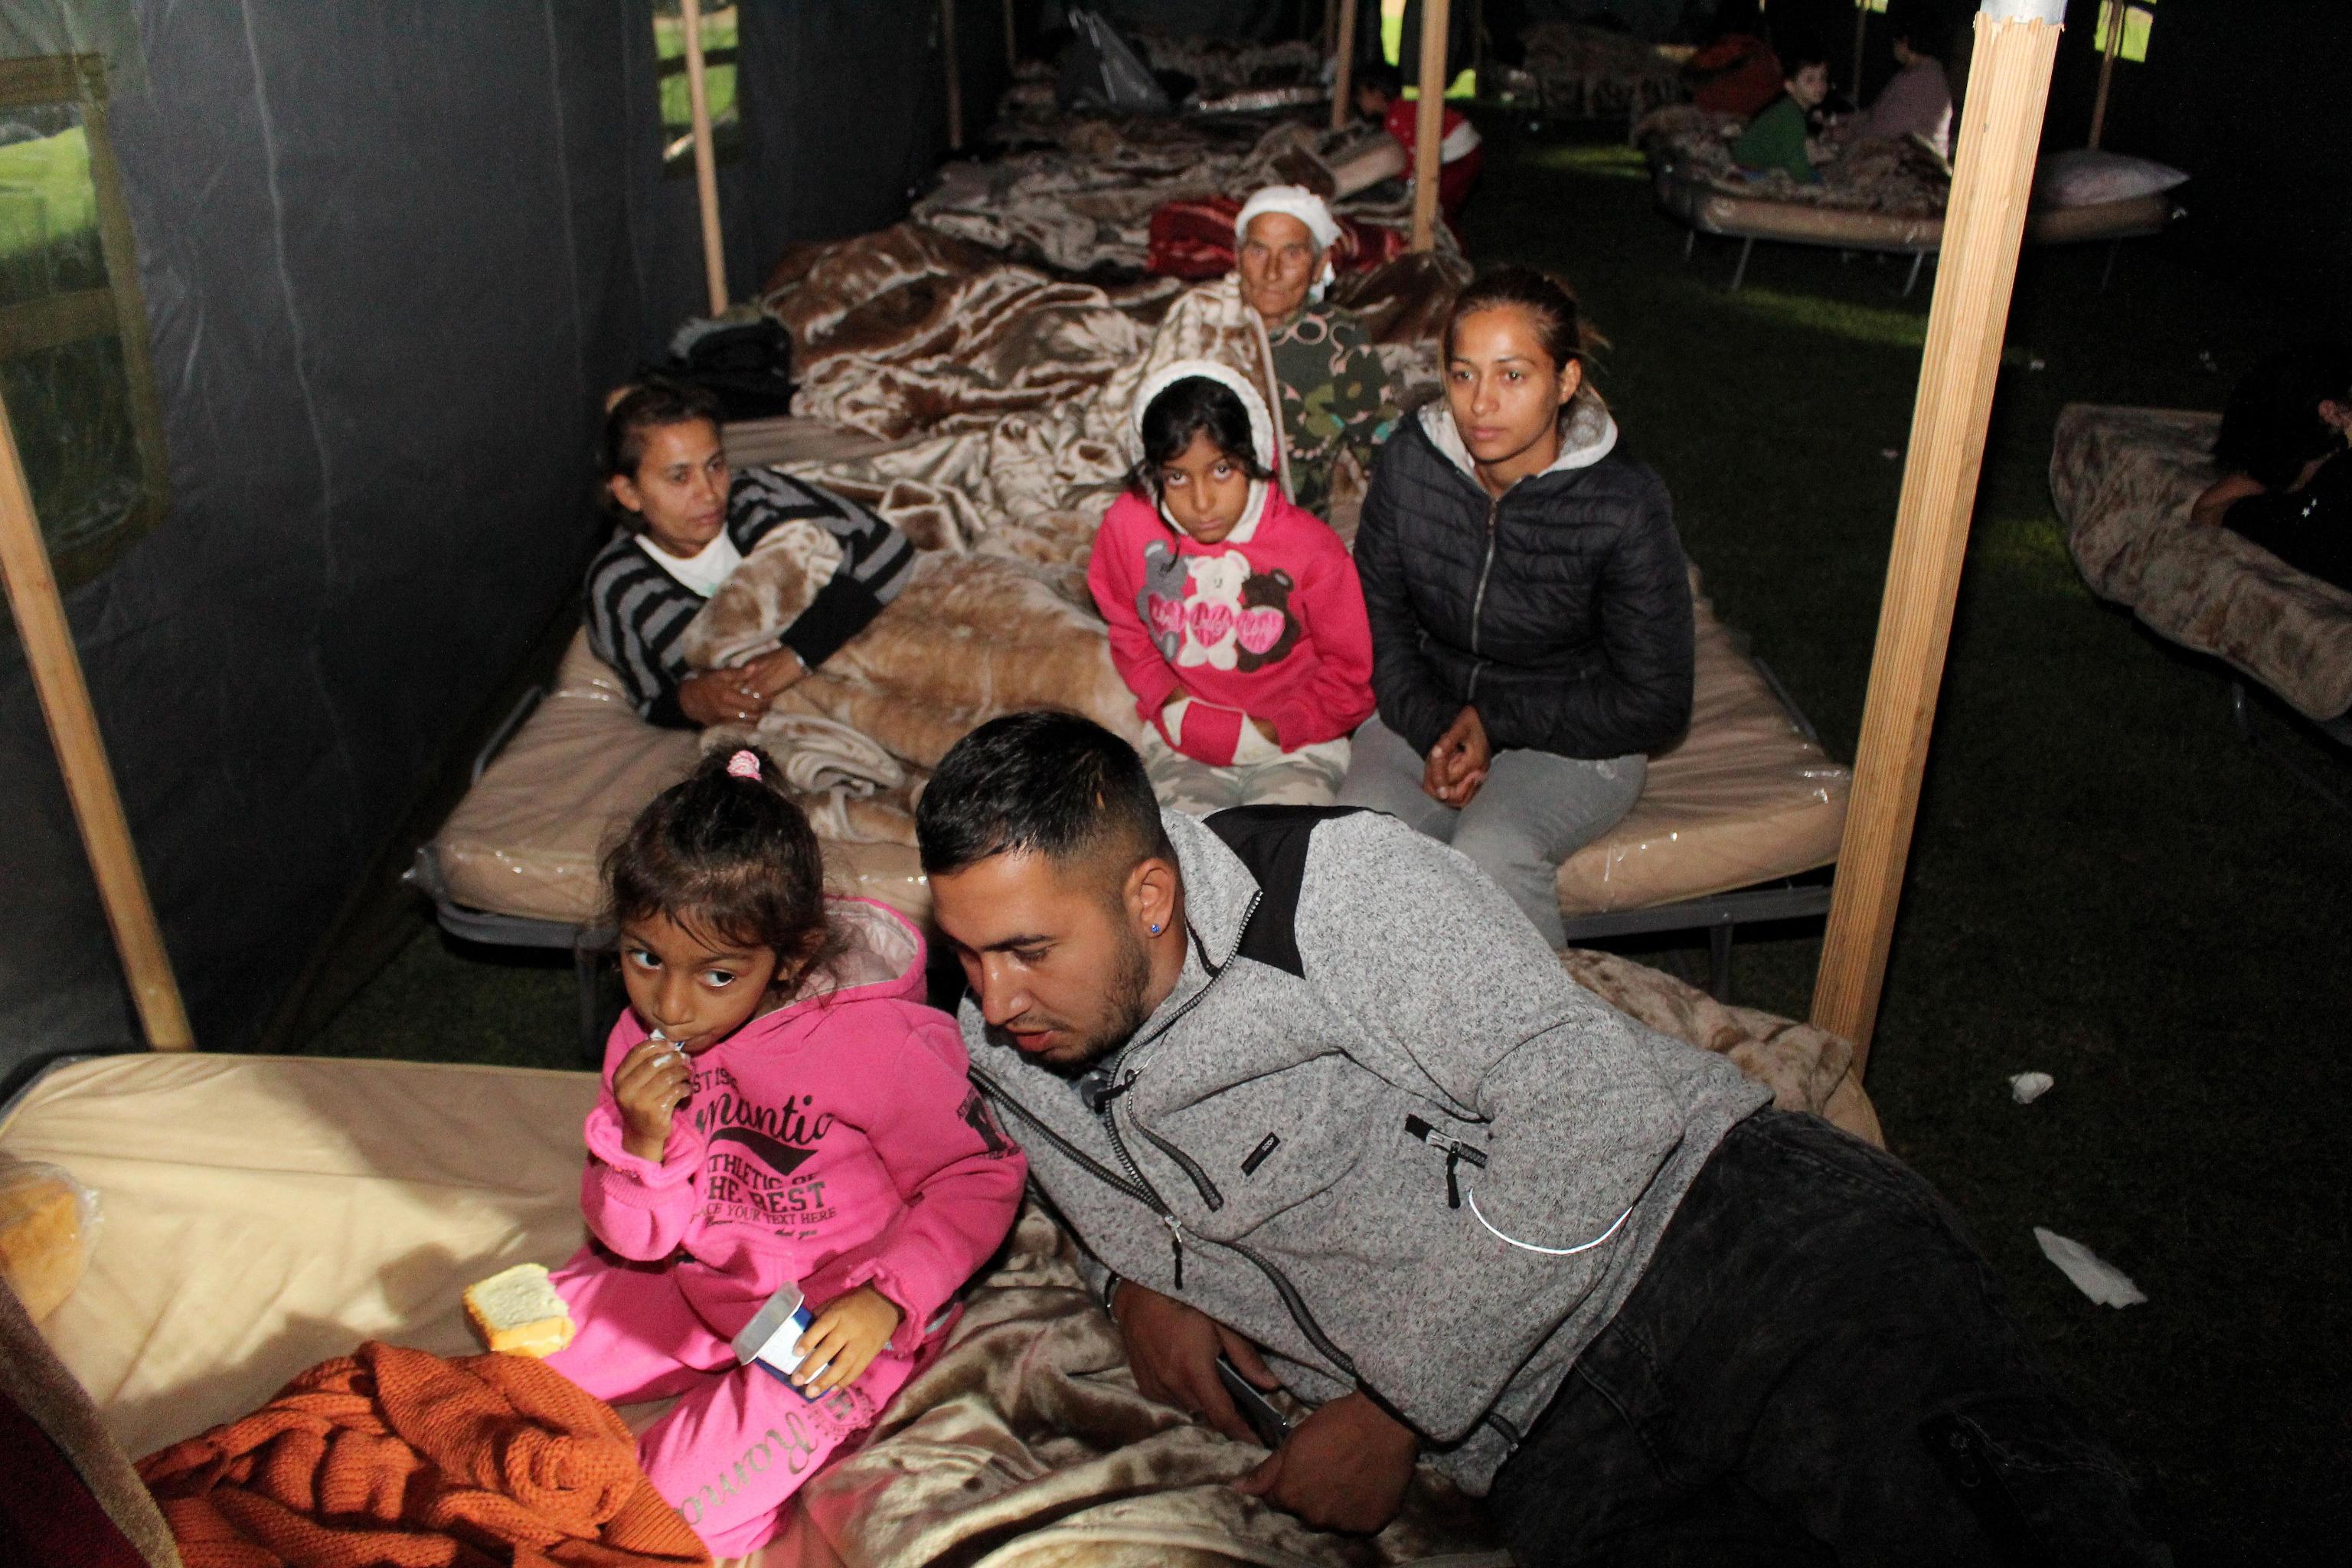 epa07862162 People affected by the earthquake stay at a temporary shelter in Durres, Albania, 22 September 2019. Albania was hit by an earthquake of 5.8 magnitude on 21 September leaving many people with damaged houses.  EPA/MALTON DIBRA